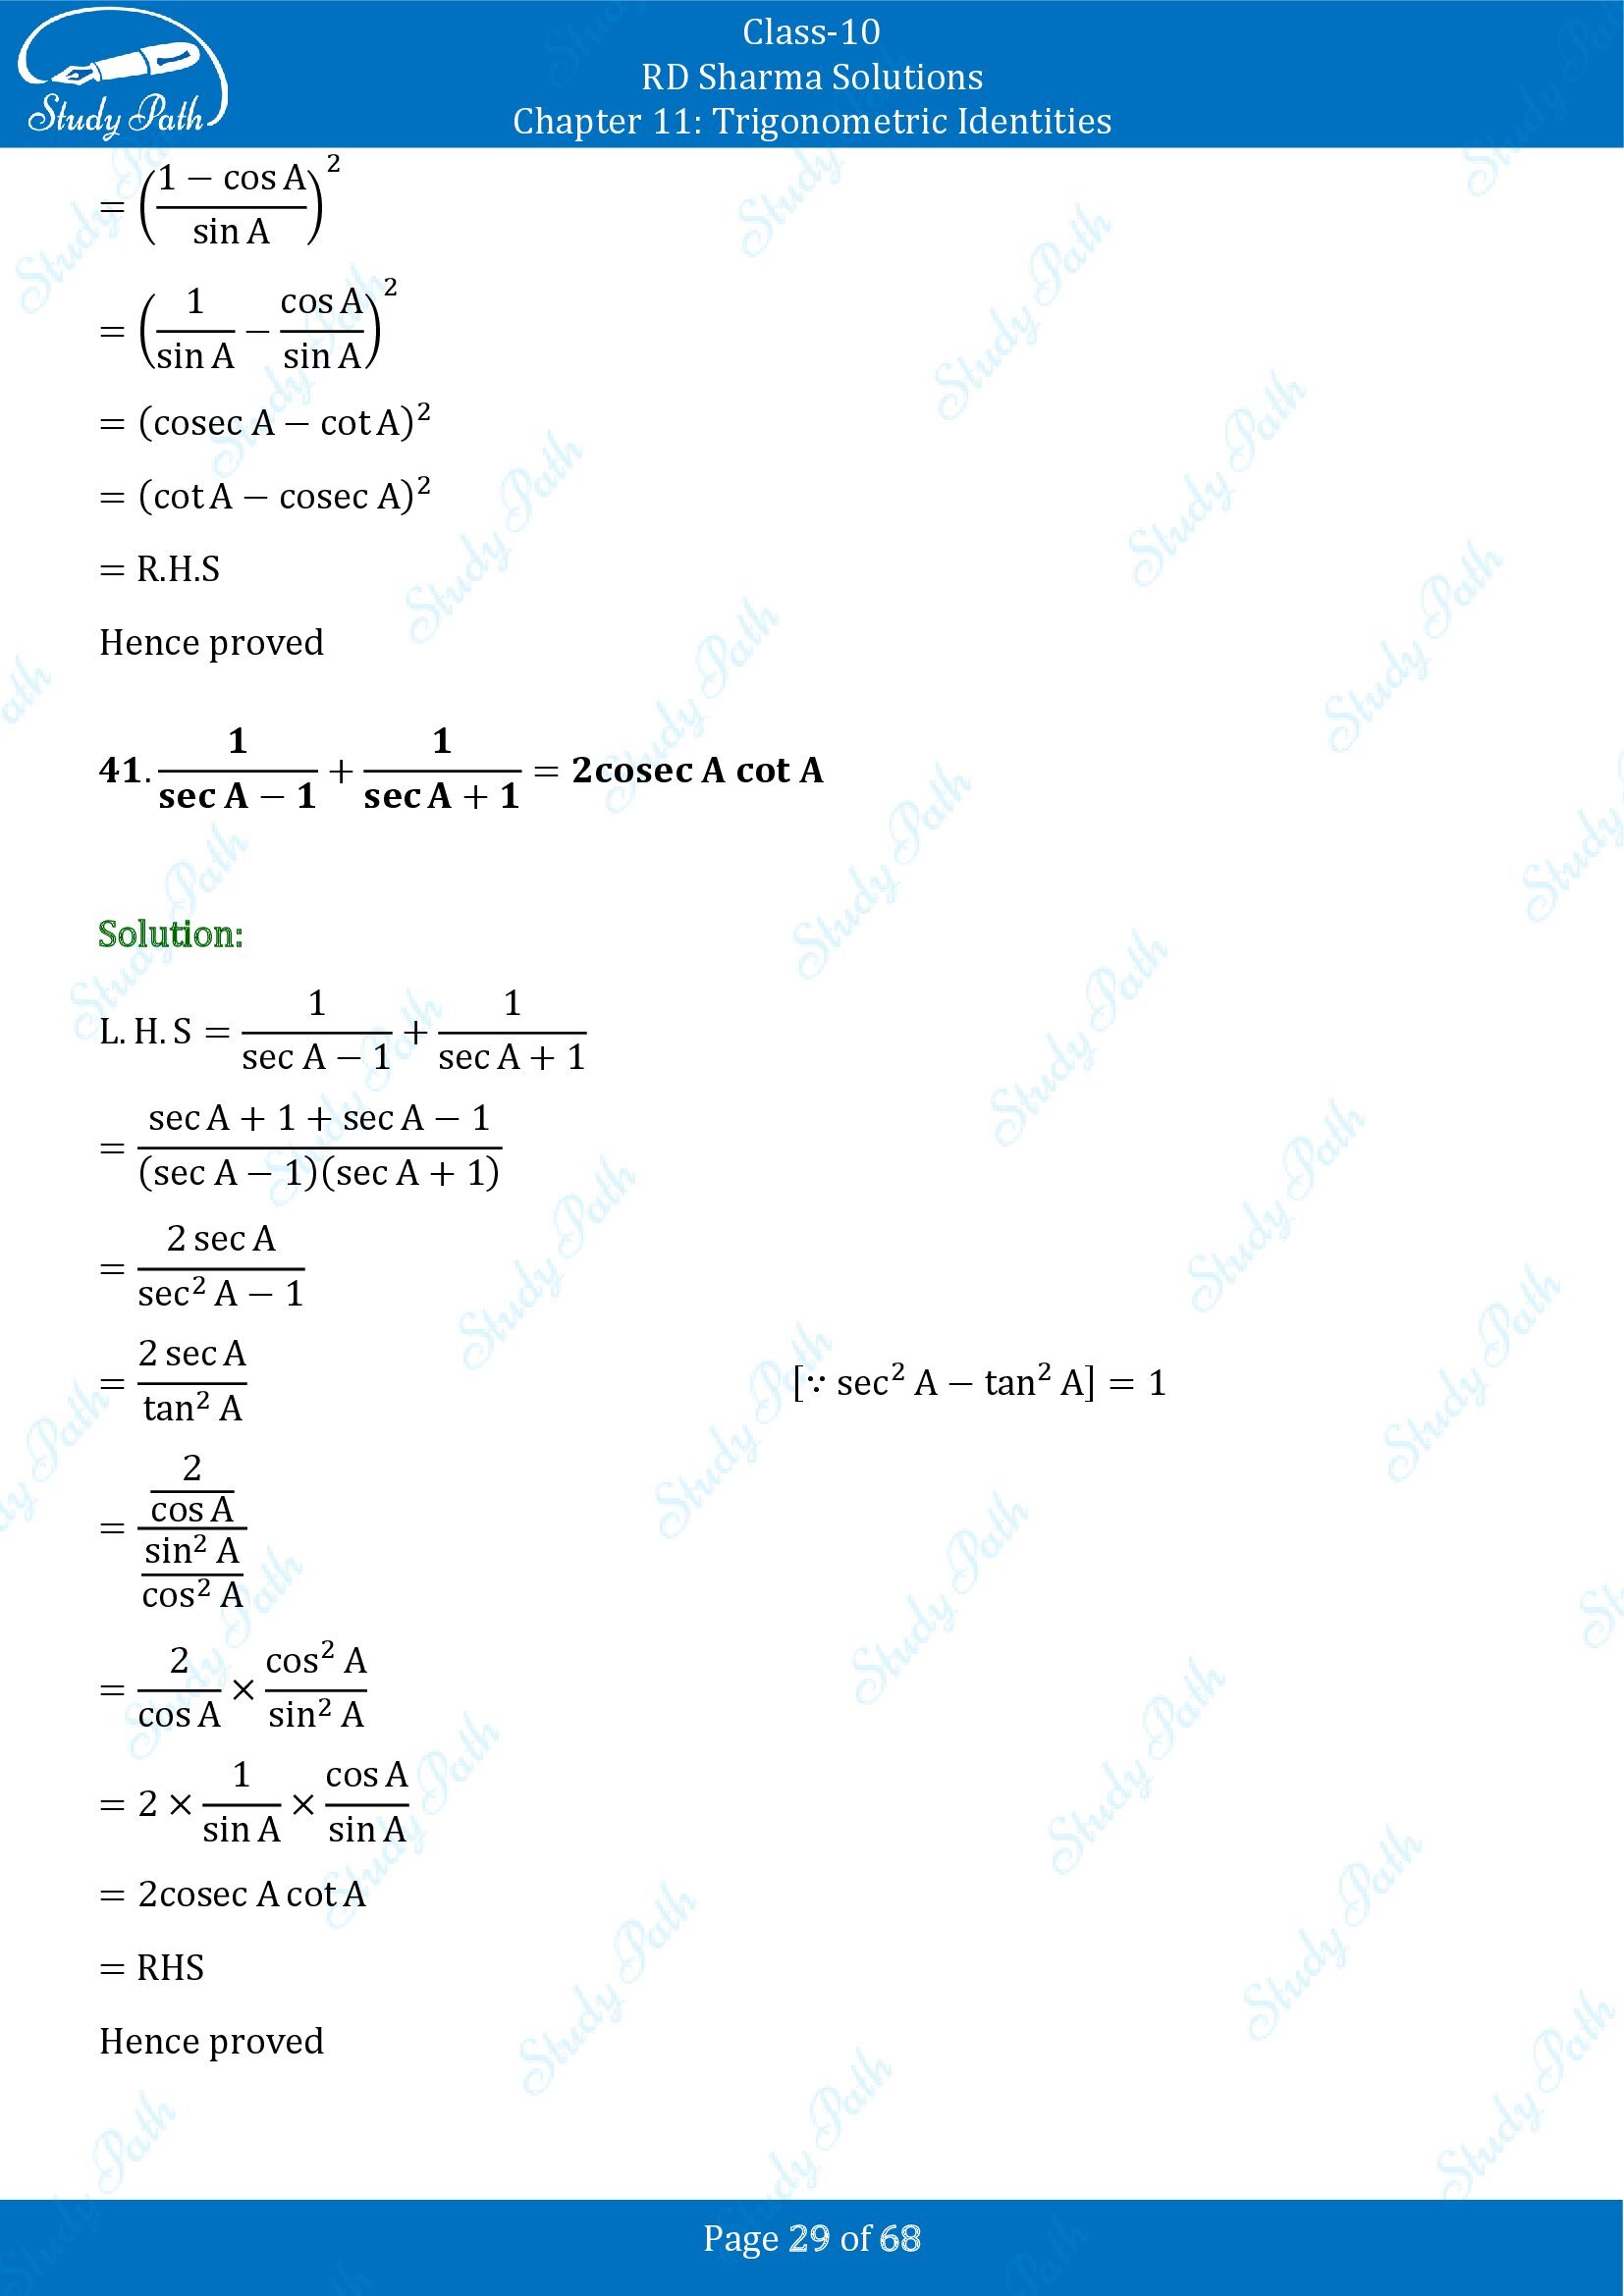 RD Sharma Solutions Class 10 Chapter 11 Trigonometric Identities Exercise 11.1 00029